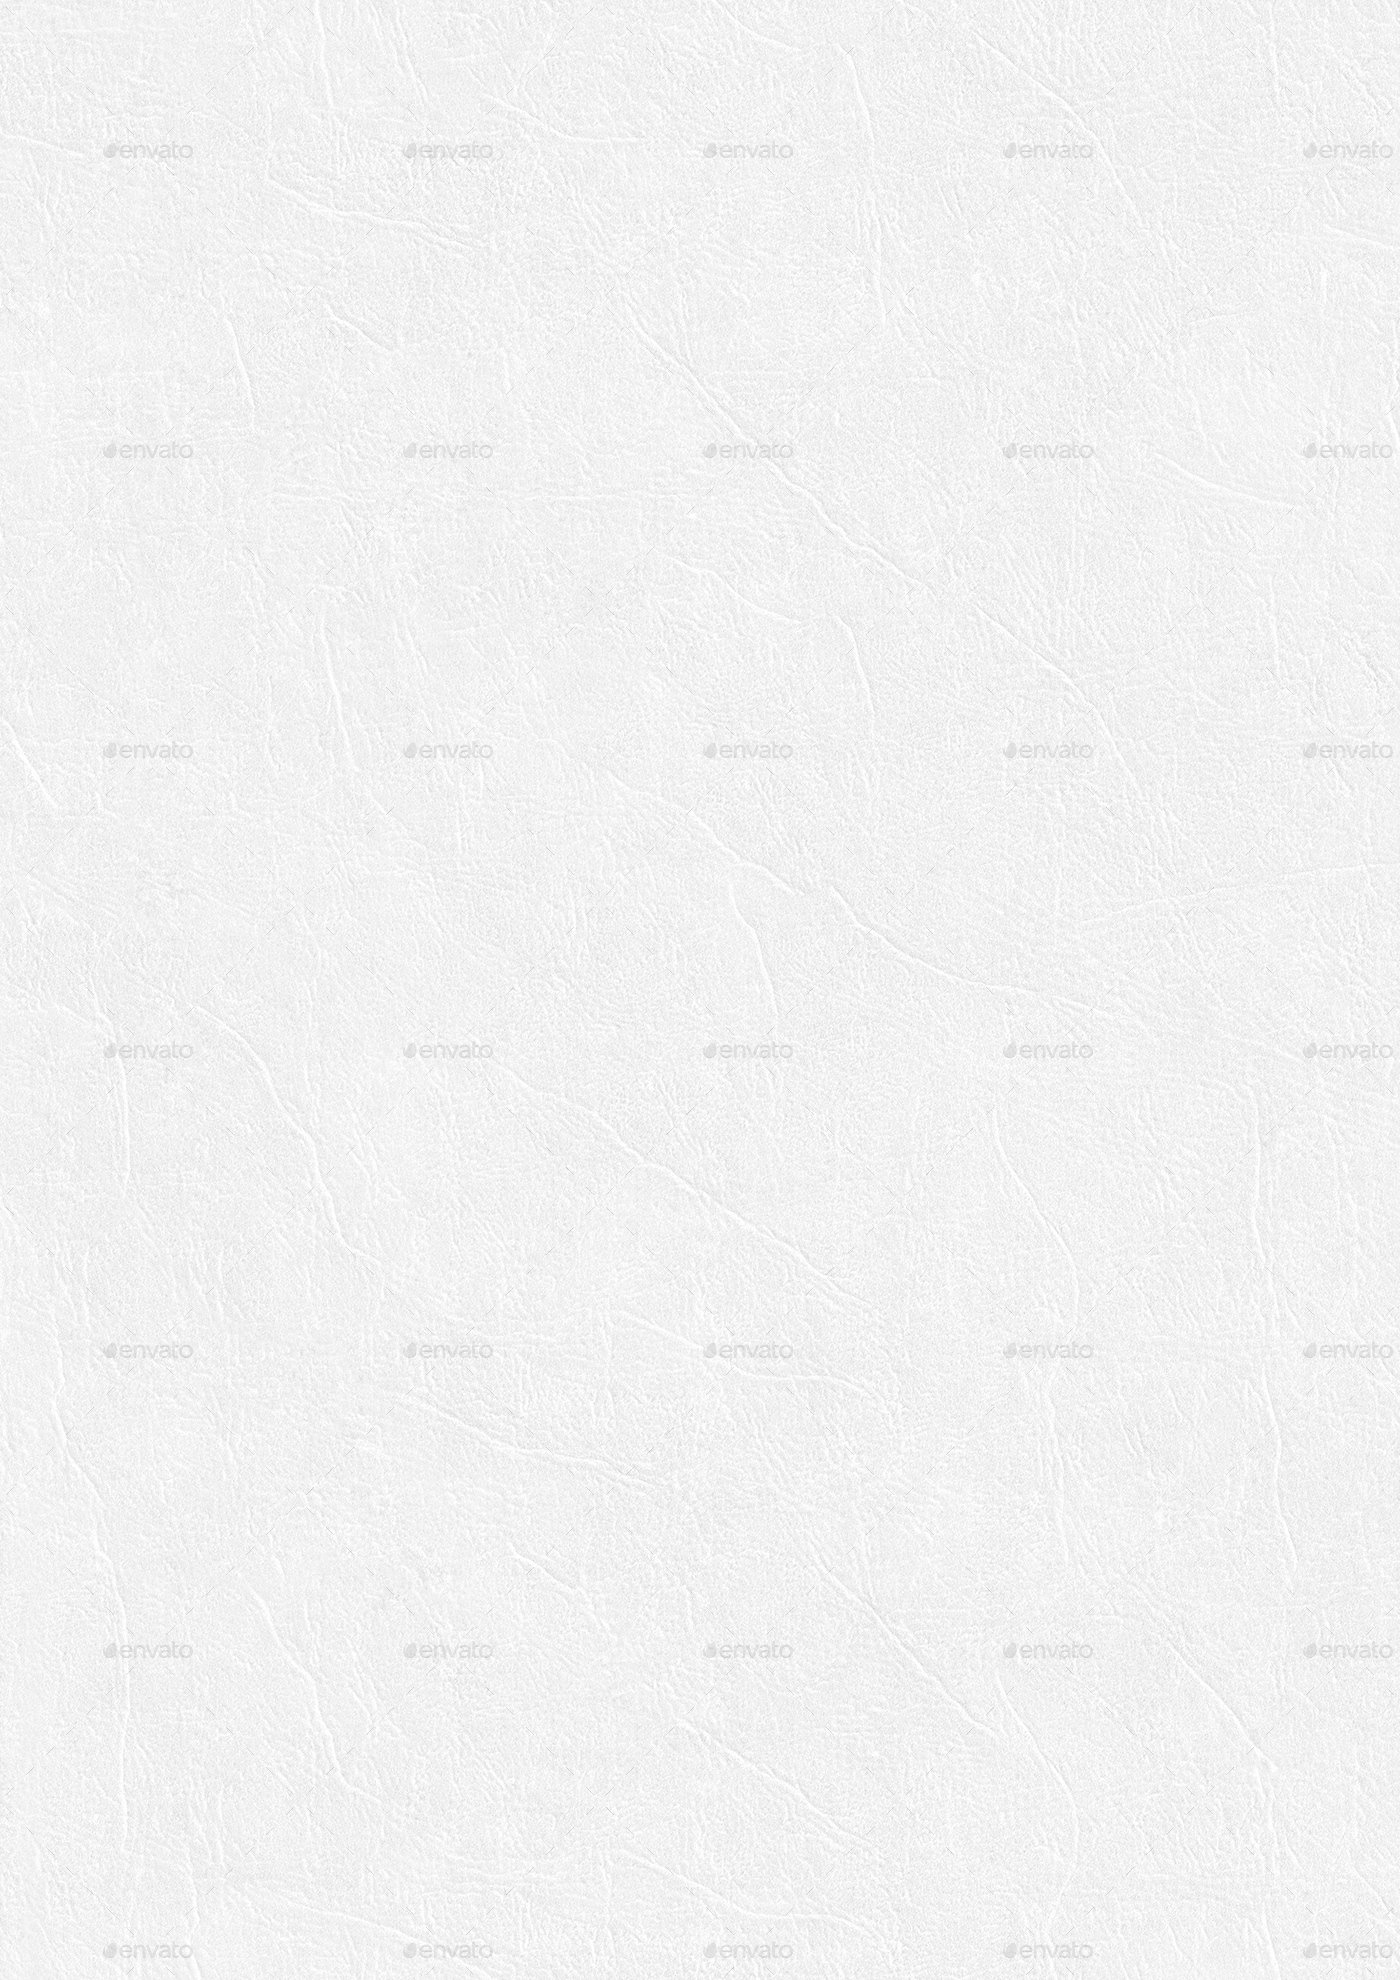 26 White Paper Background Textures By Texturesstore 3docean